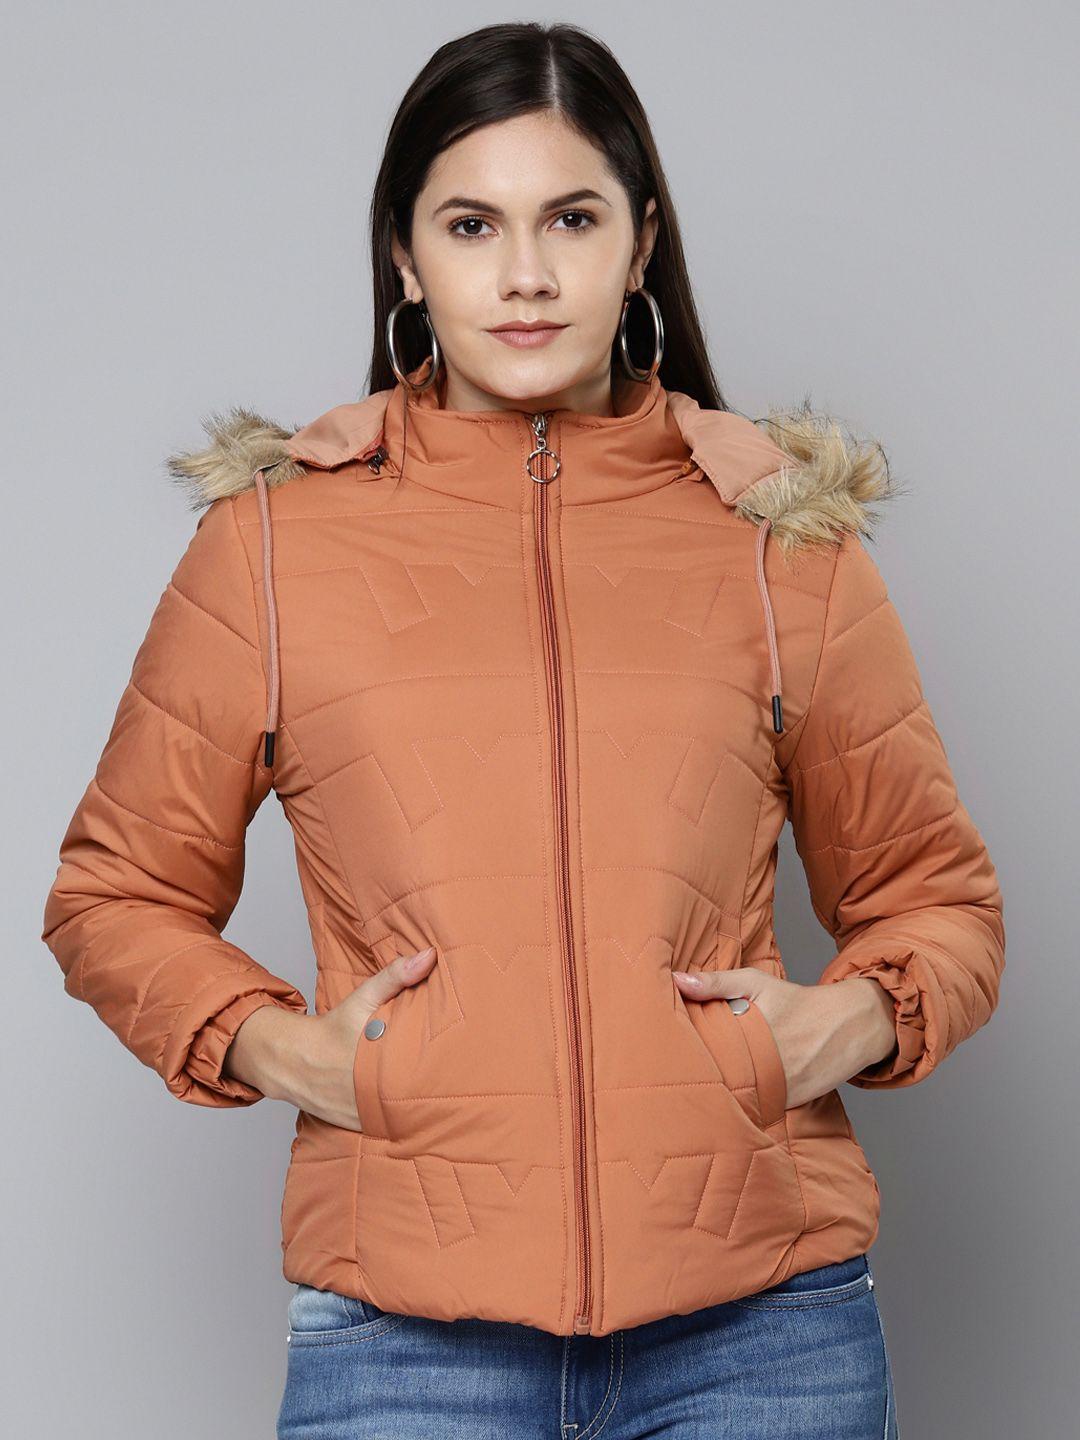 foreign culture by fort collins women peach-coloured parka jacket with detachable hood